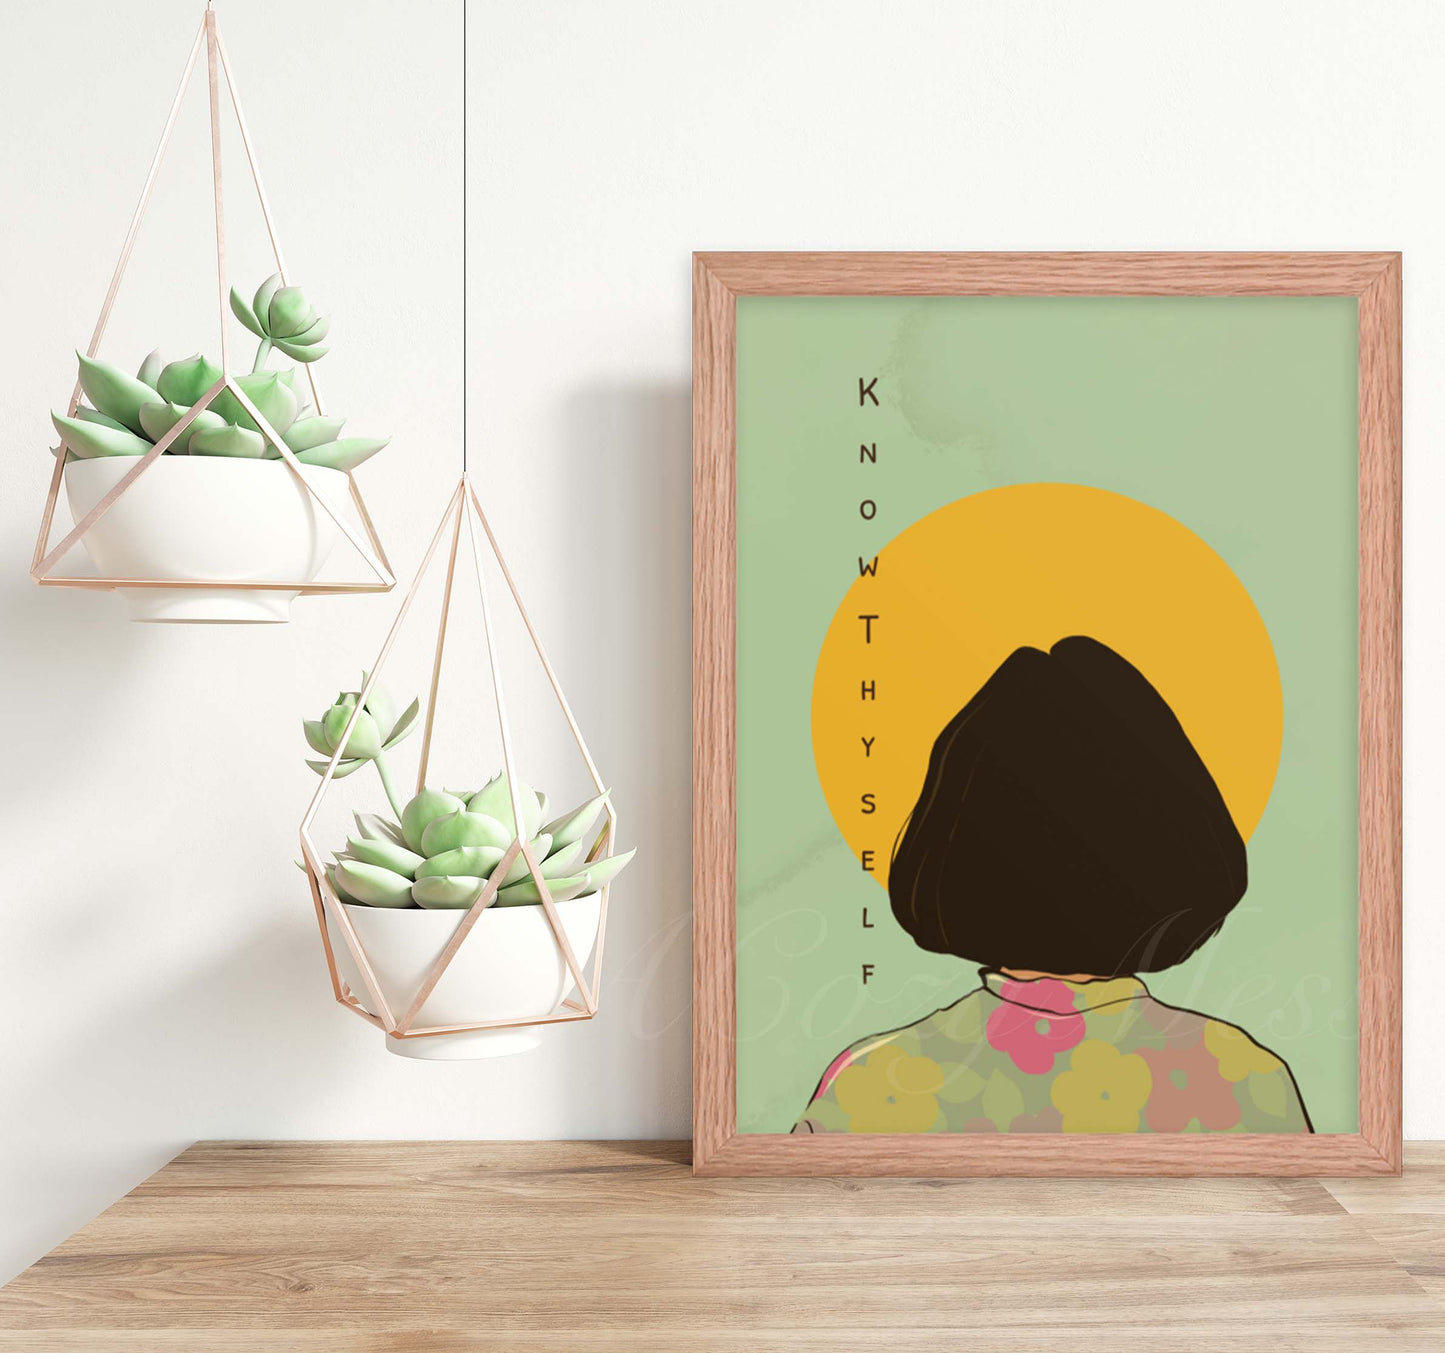 Illustration of a woman in a floral shirt facing the sun with the phrase 'Know Thyself' written alongside in oak wood frame.